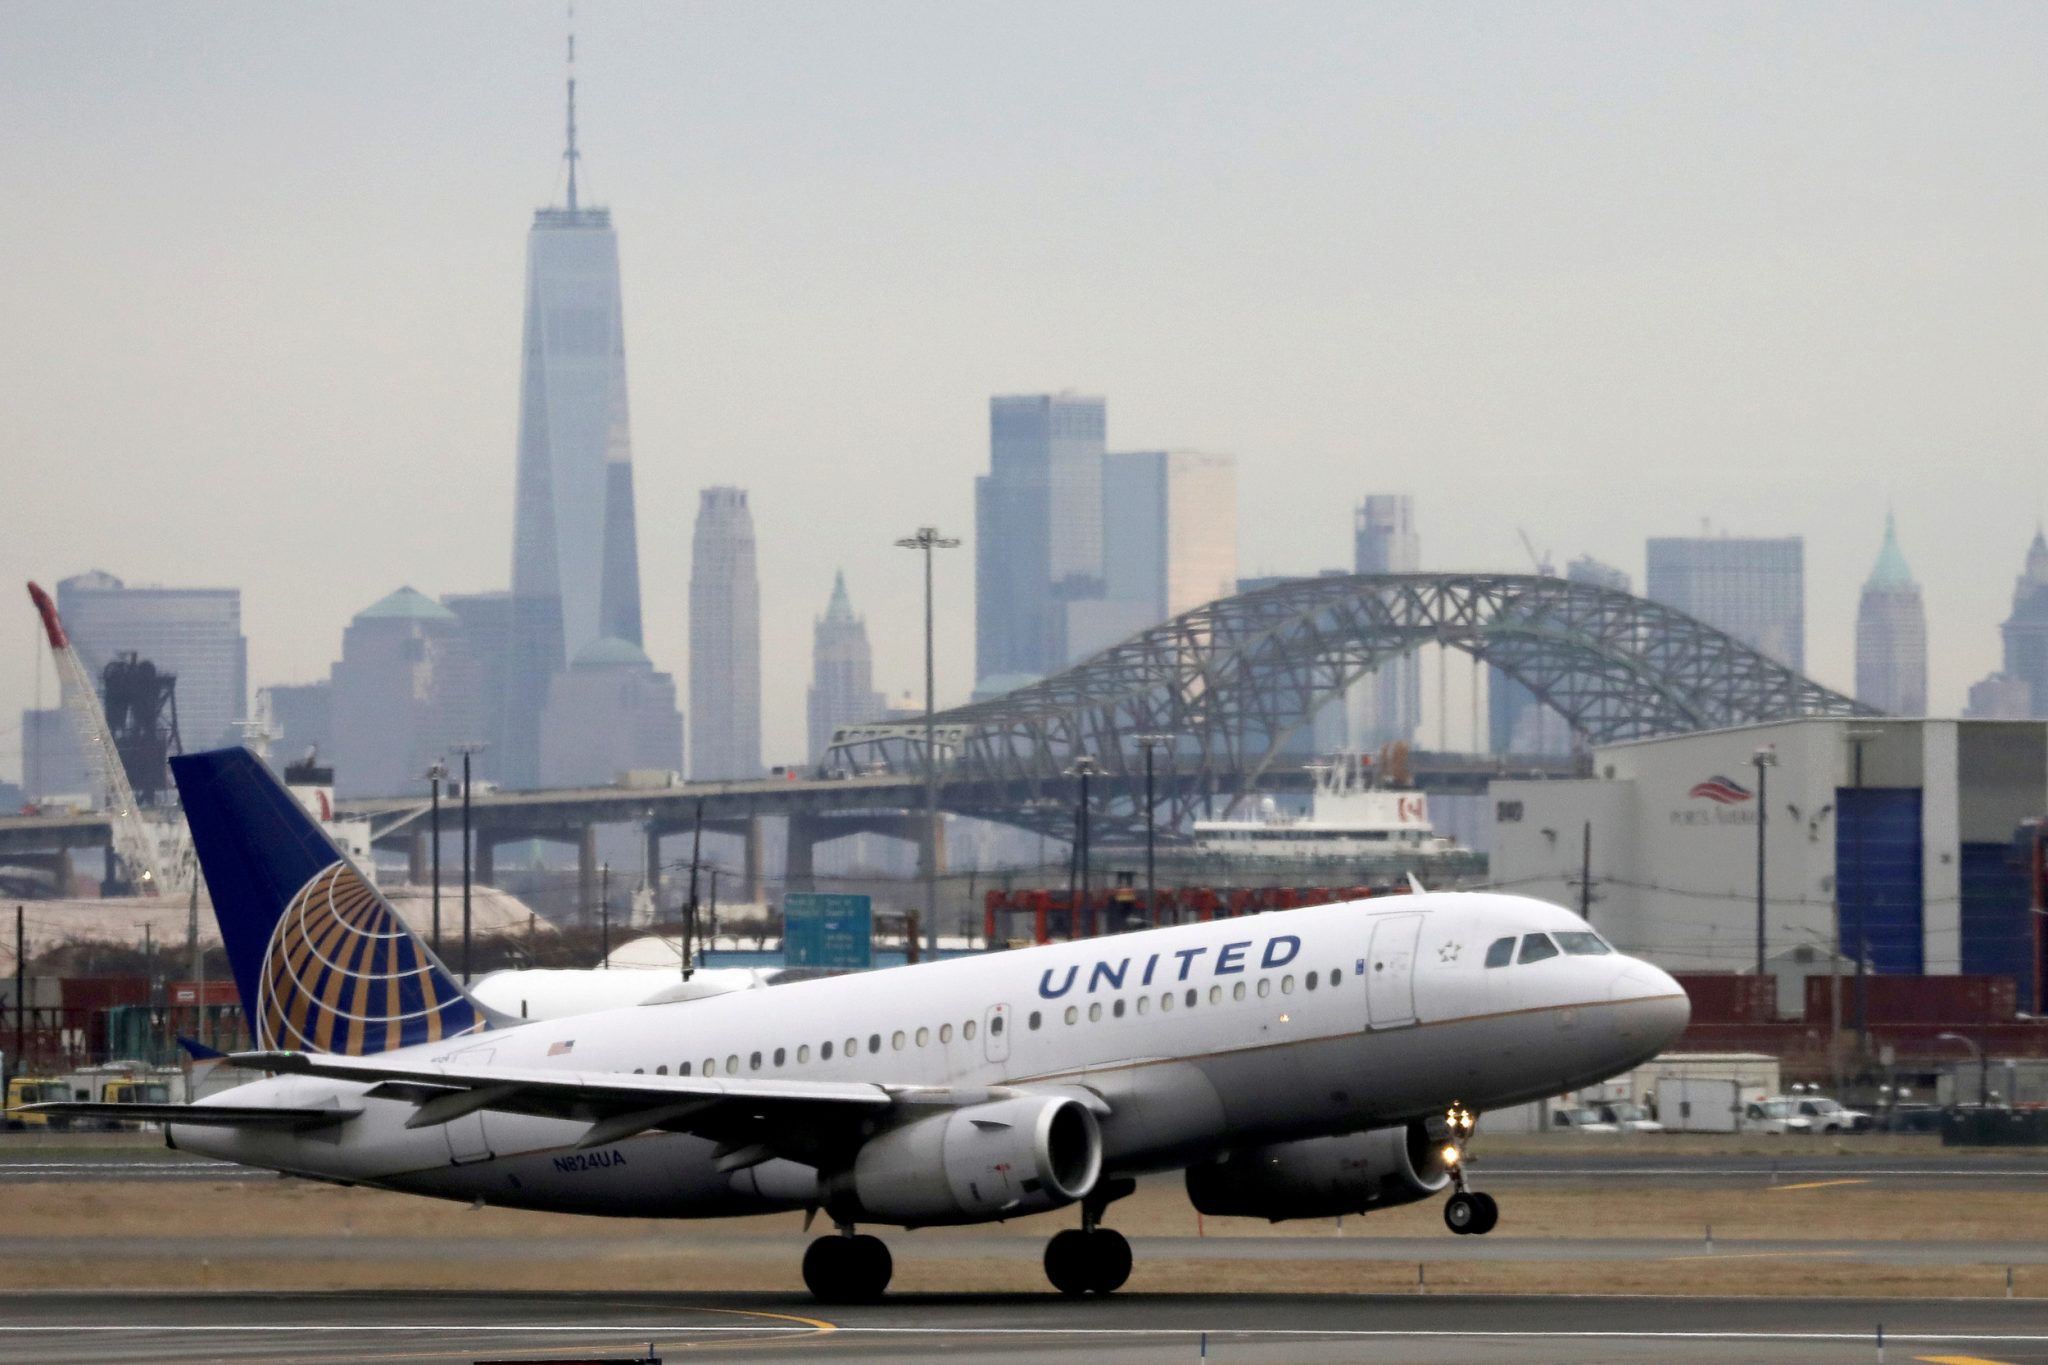 Newark, which was the 15th busiest U.S. airport in 2020 by total passengers, has seen lengthy flight delays, long taxi delays and numerous cancellations in recent weeks.